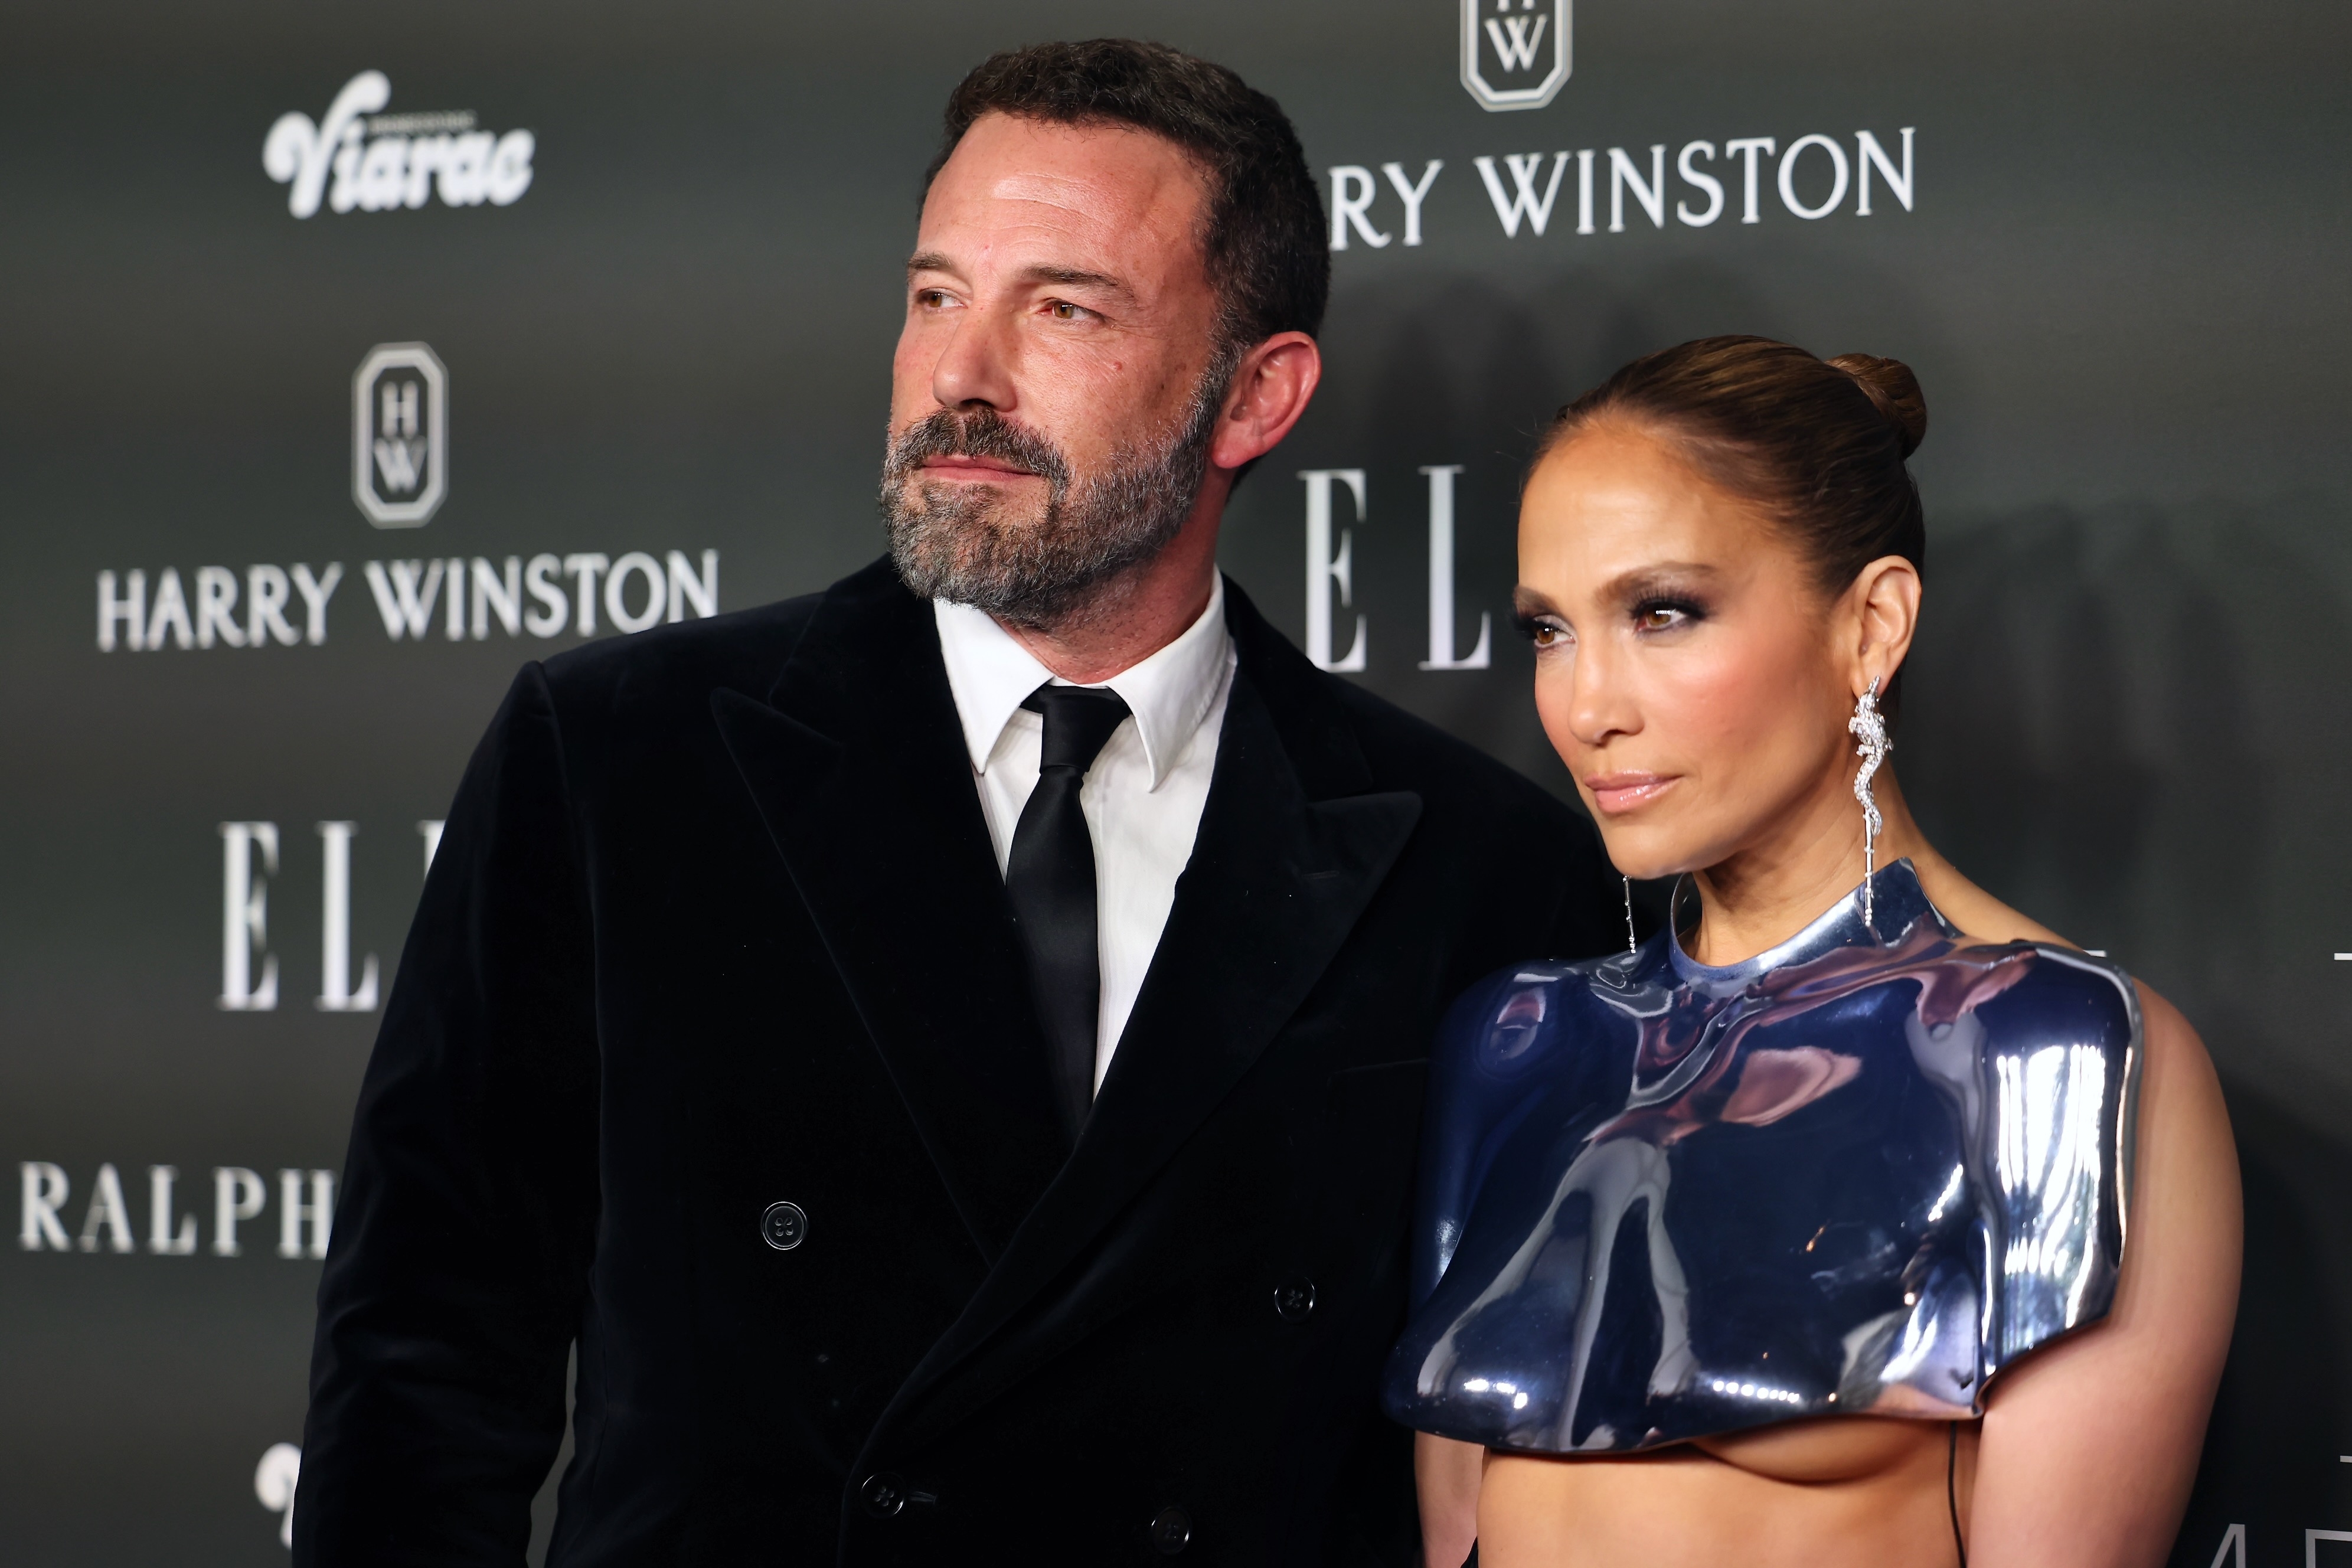 Ben Affleck and Jennifer Lopez on the red carpet. Ben is wearing a black suit and tie; Jennifer is wearing a futuristic metallic top